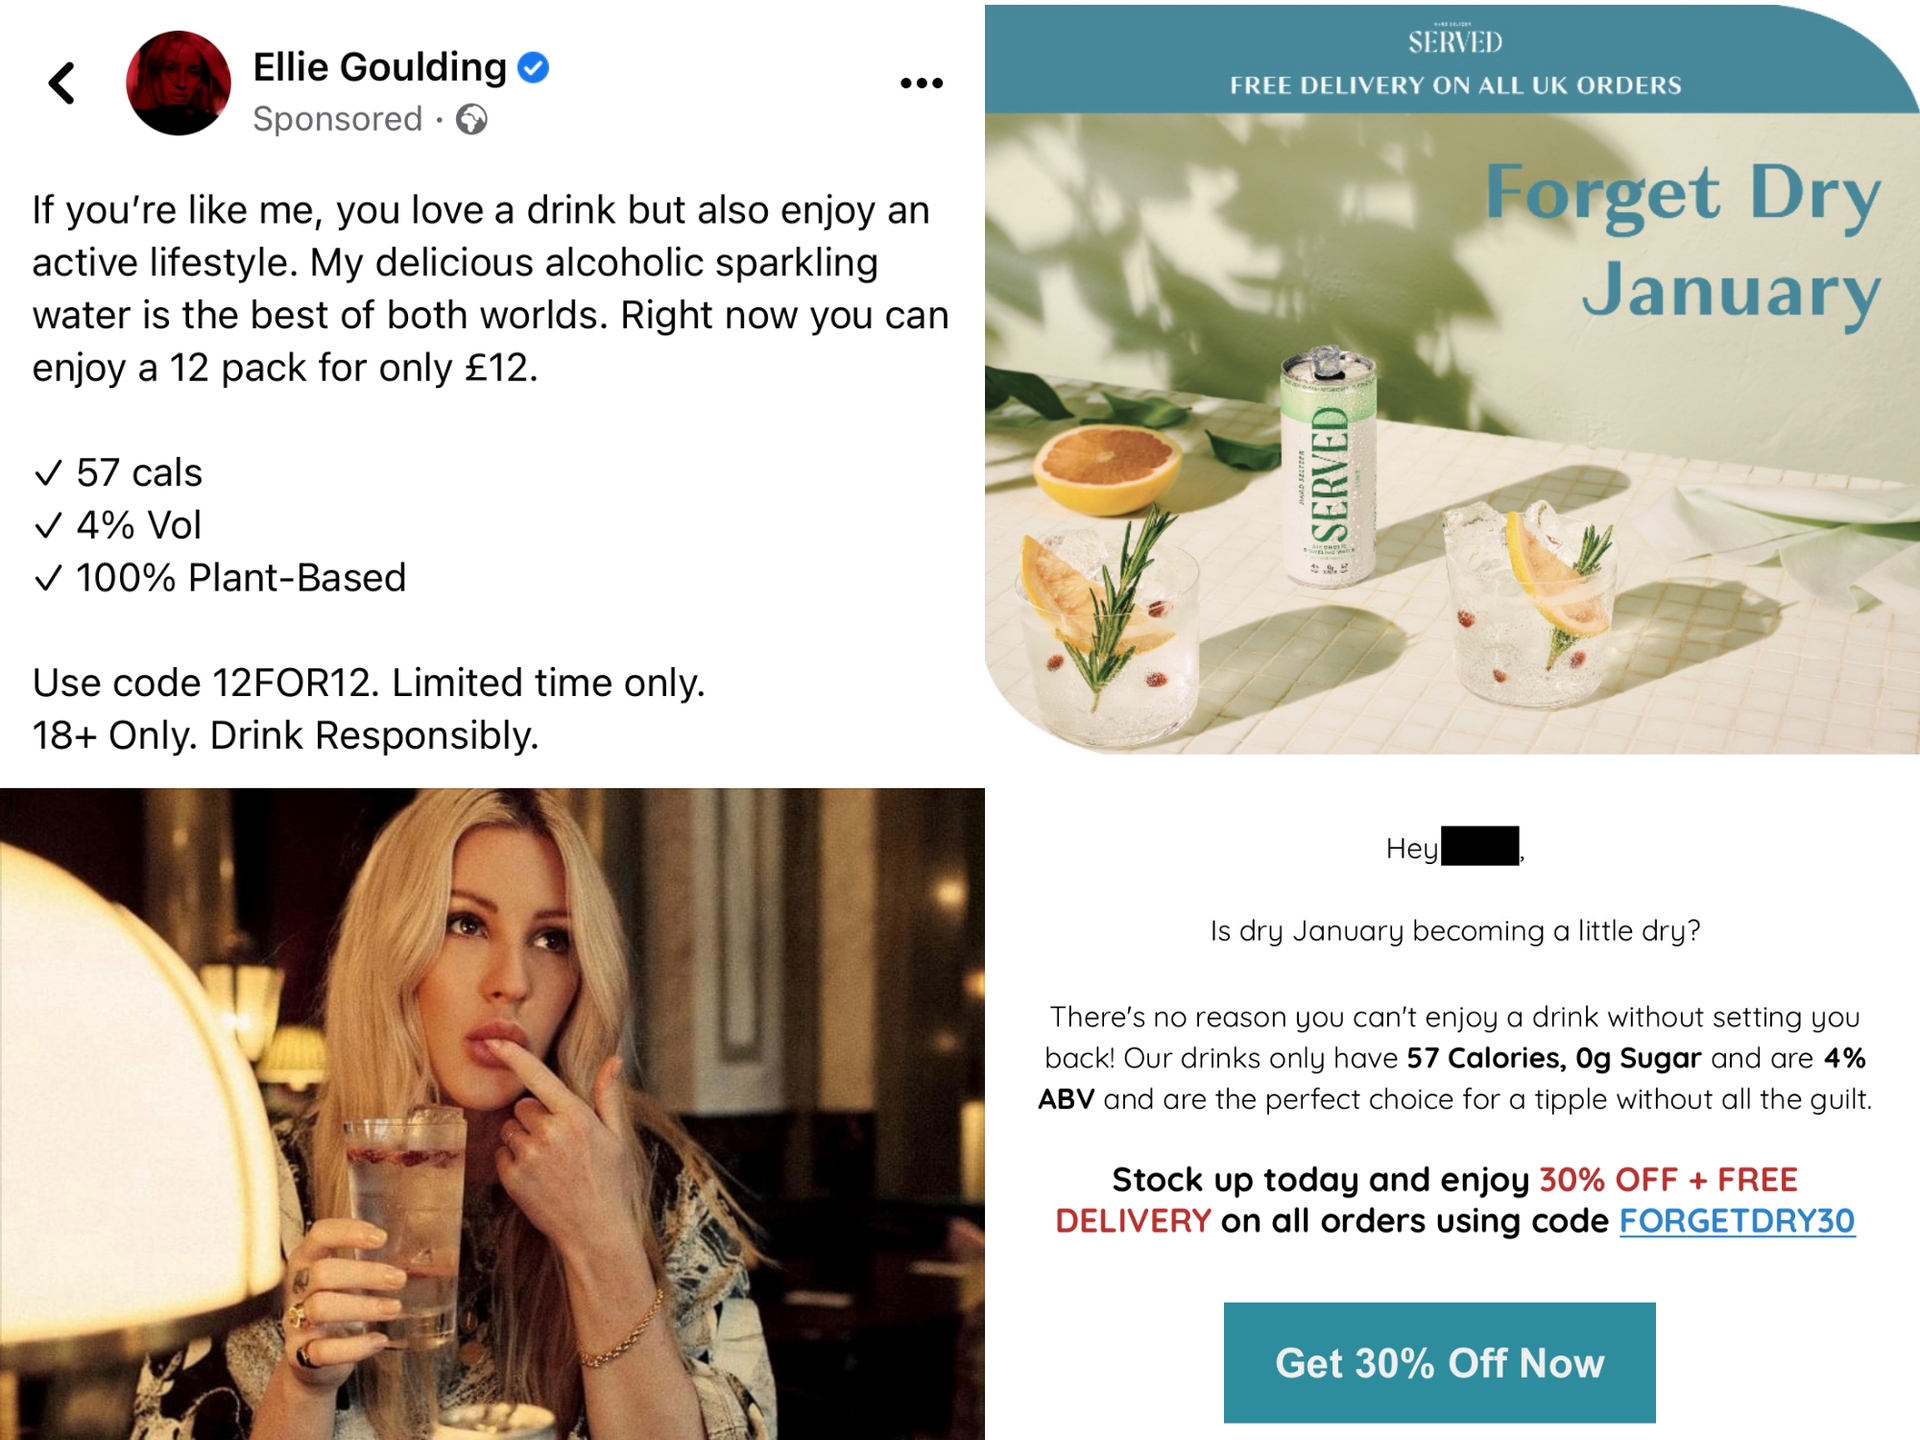 The ASA took issue with a Facebook ad featuring Goulding as well as an email ad 'encouraging people to break Dry January'.